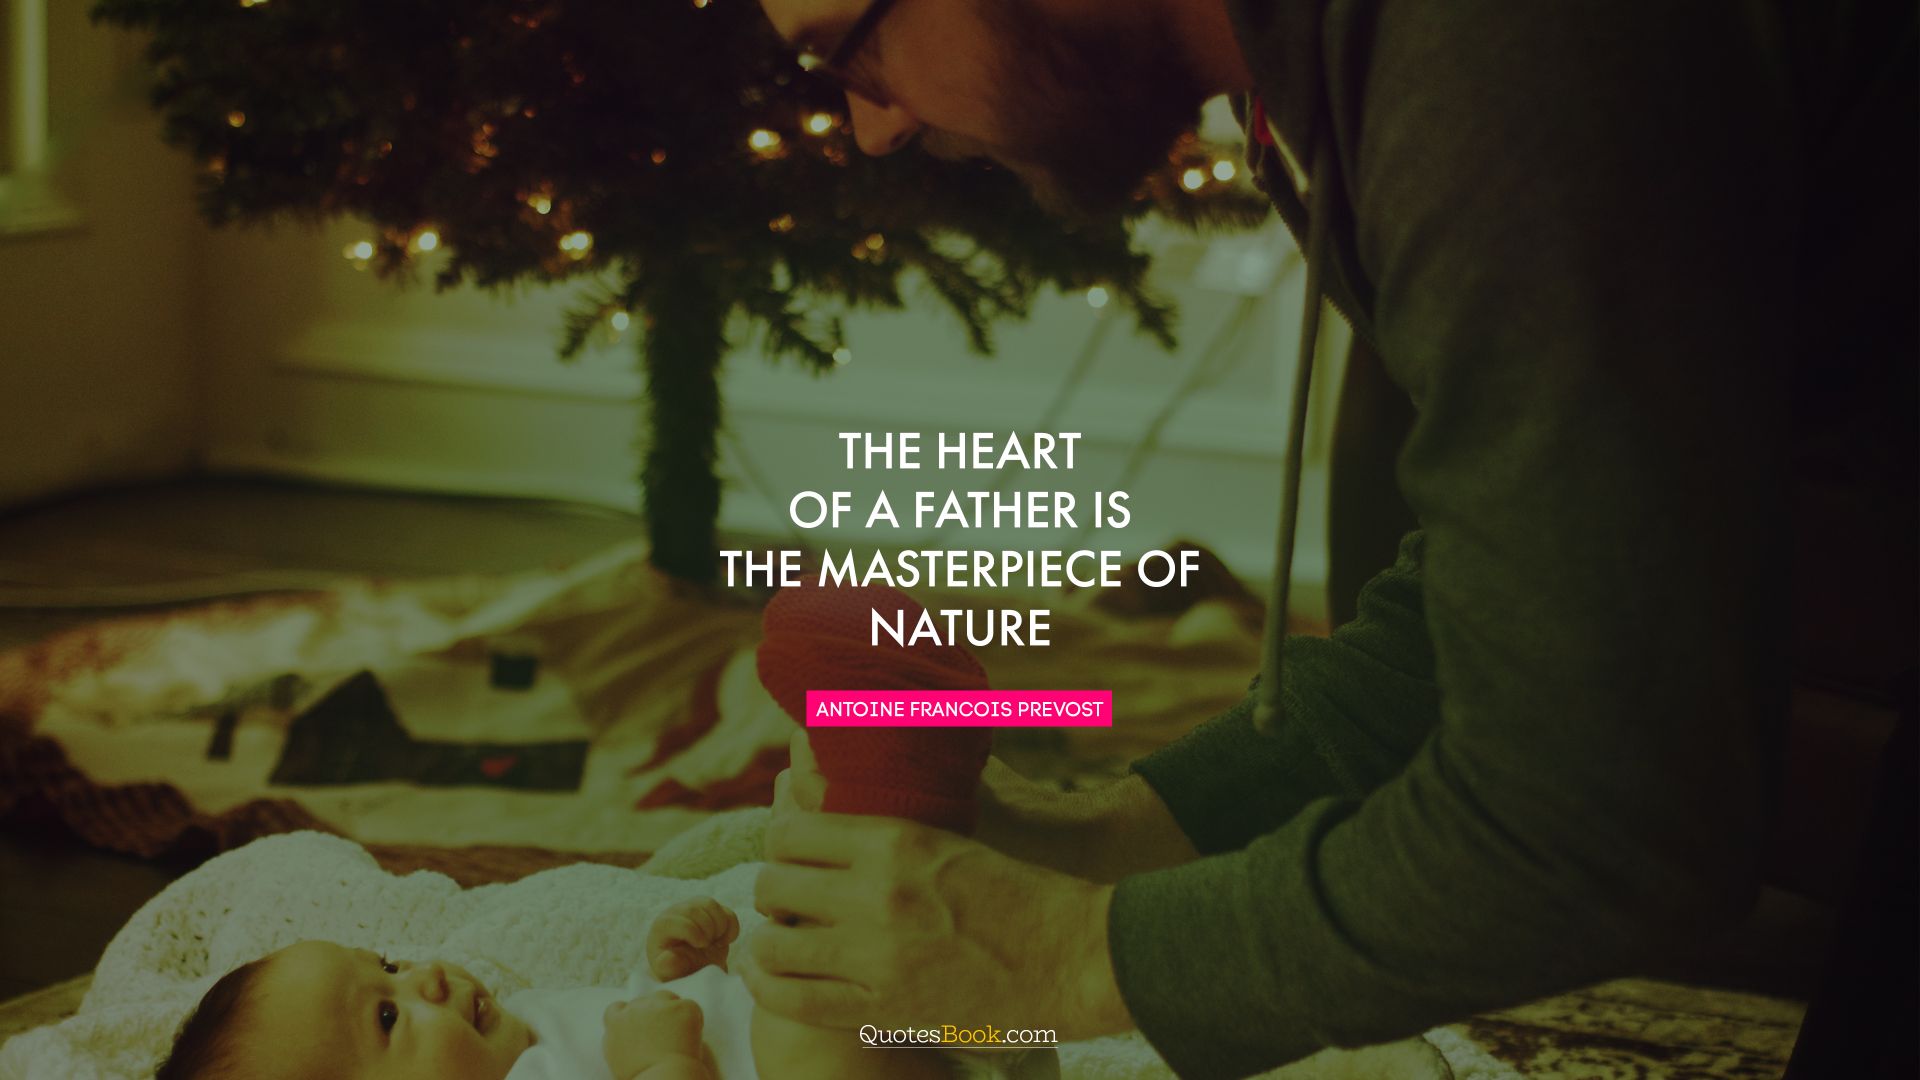 The heart of a father is the masterpiece of nature. - Quote by Antoine Francois Prevost